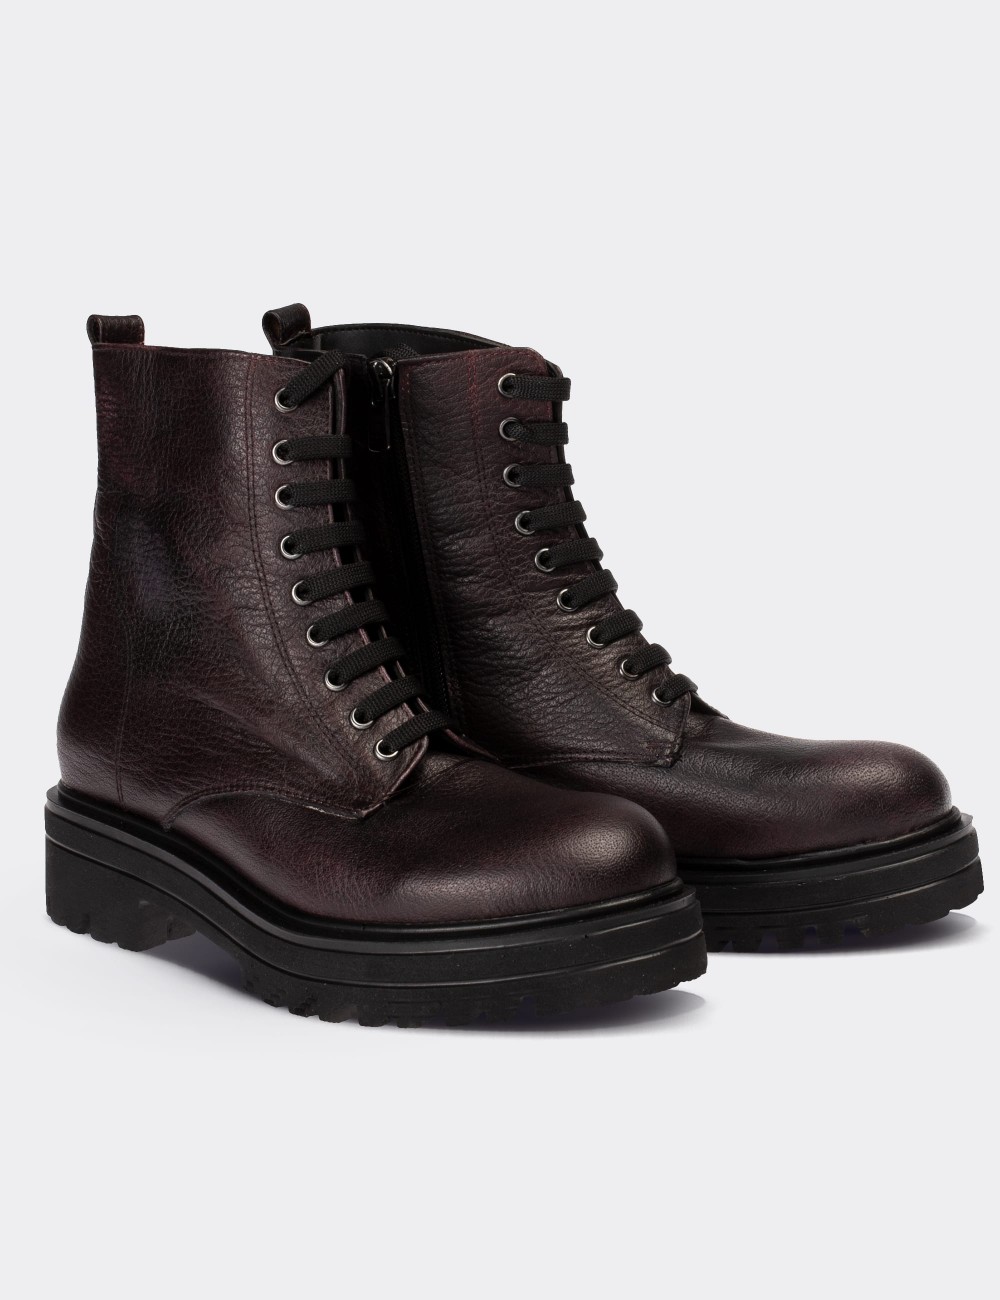 Brown  Leather Postal Boots - 01814ZKHVE03